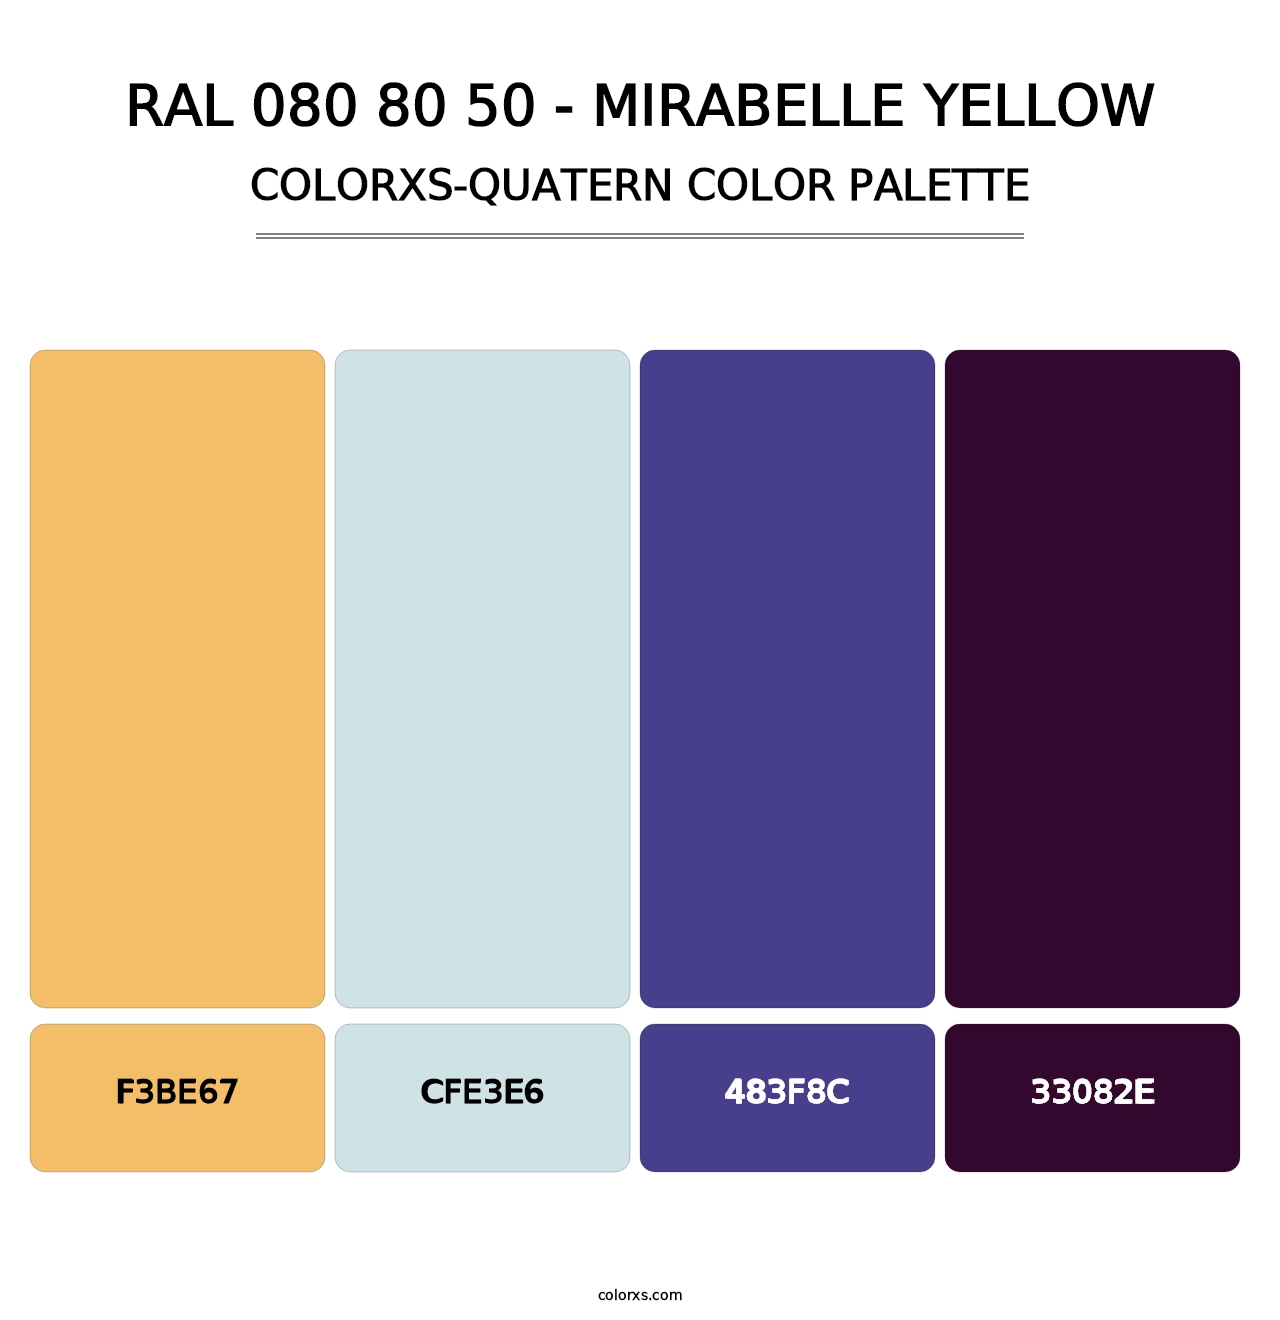 RAL 080 80 50 - Mirabelle Yellow - Colorxs Quatern Palette